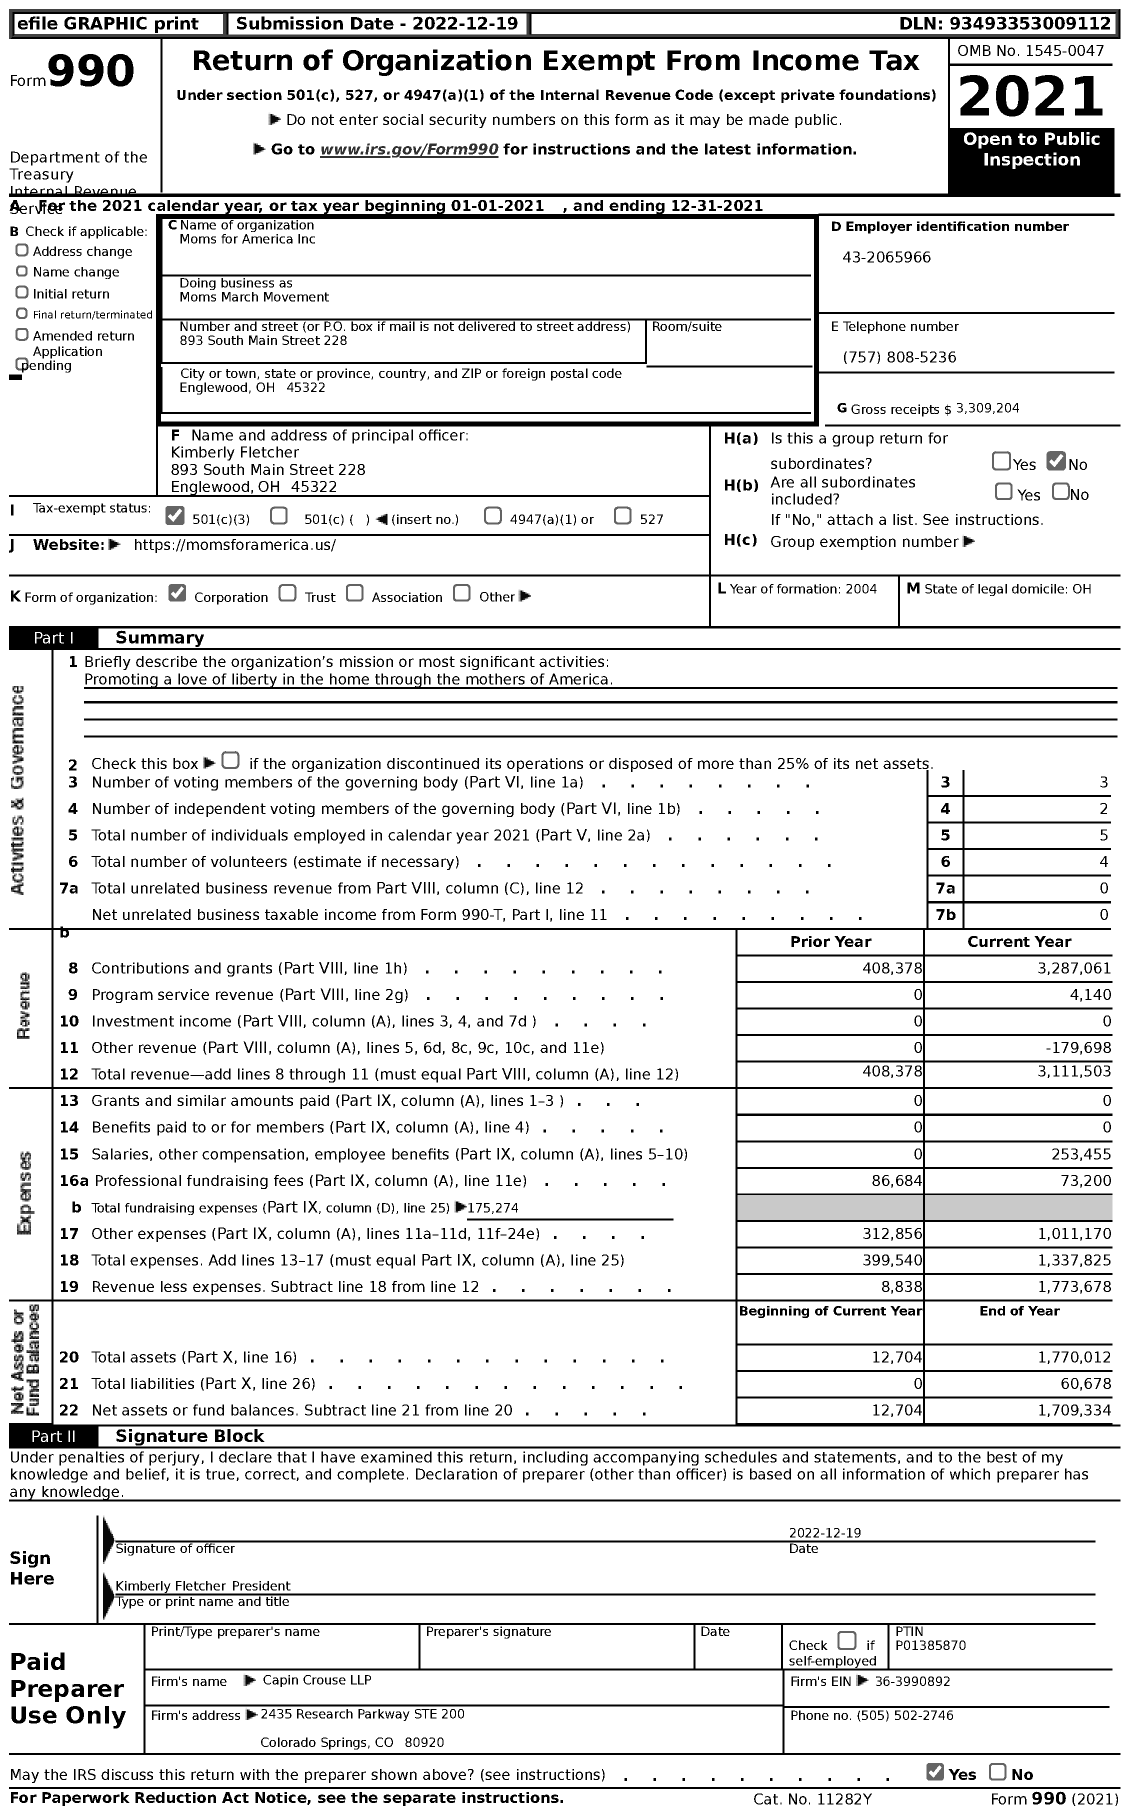 Image of first page of 2021 Form 990 for Moms March Movement